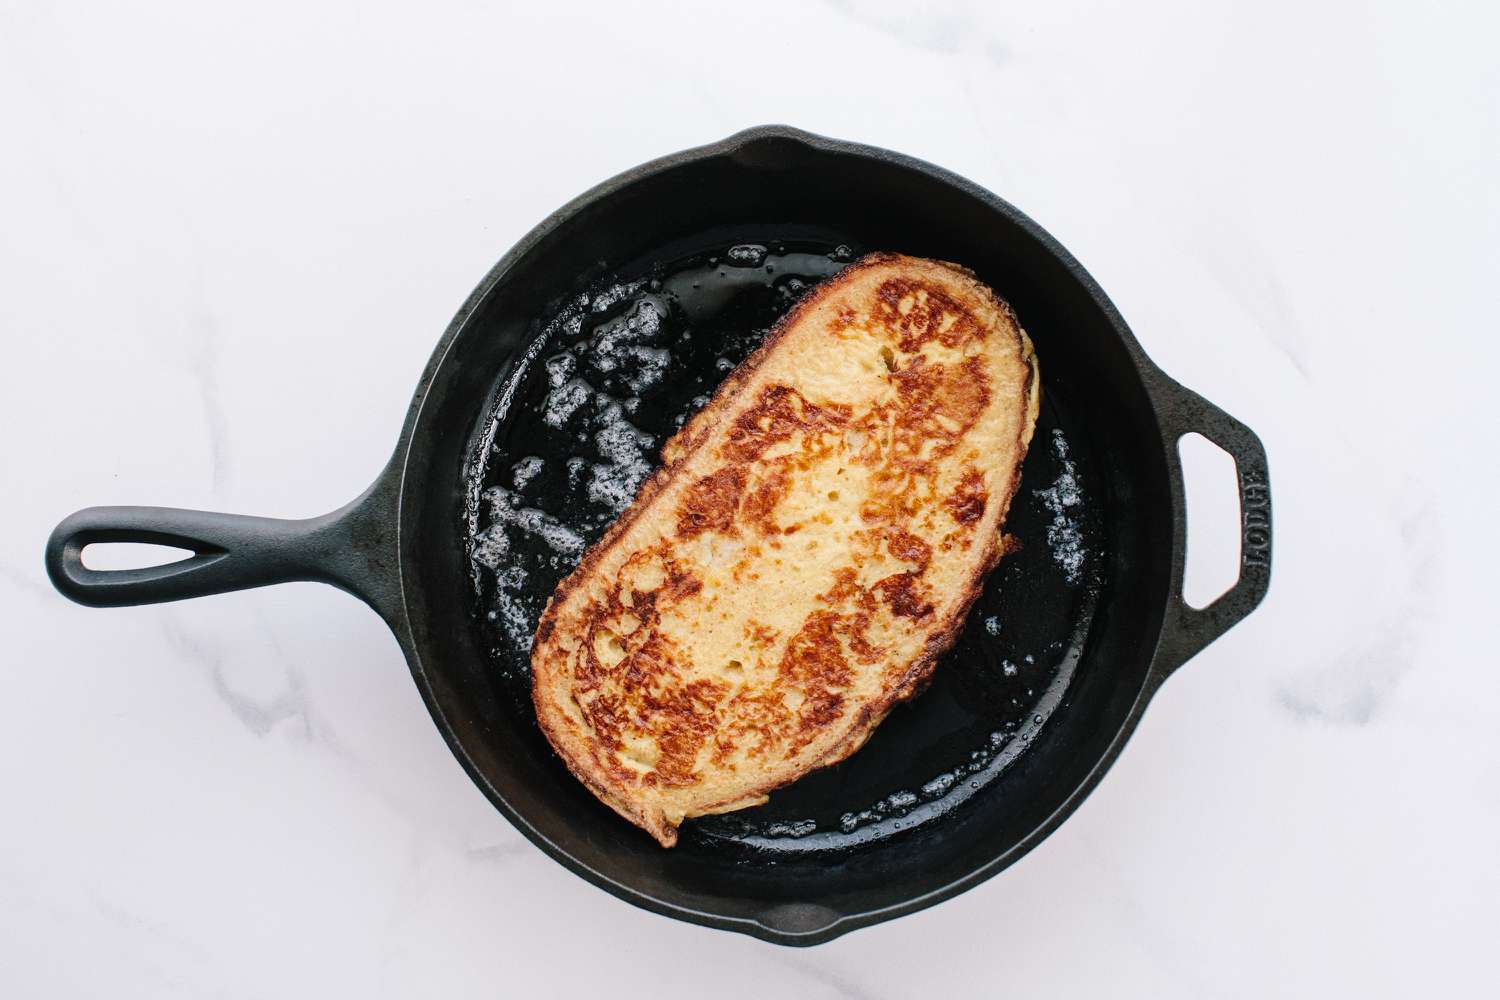 Sourdough French toast cooking in a pan